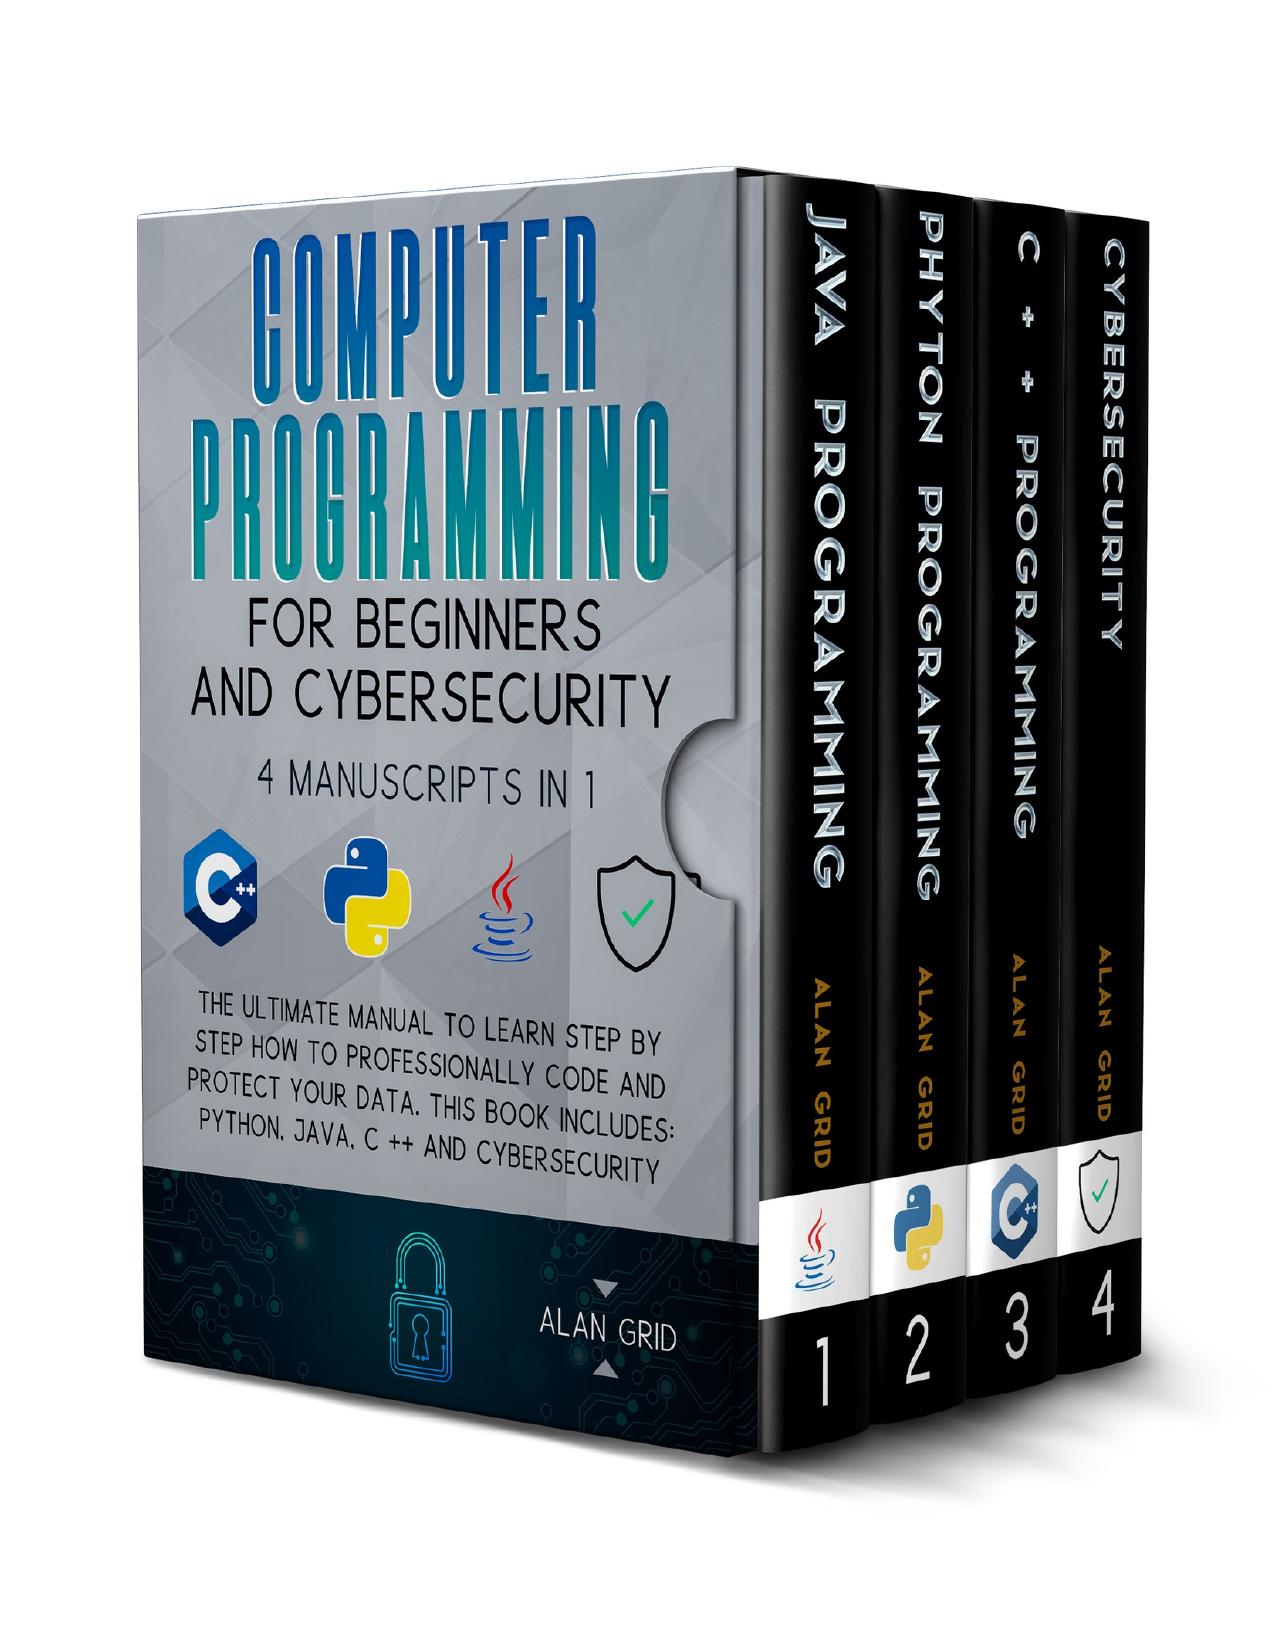 Computer Programming for Beginners and Cybersecurity: The Ultimate Manual to Learn step by step how to Professionally Code and Protect Your Data. This Book includes: Python, Java, C++ & Cybersecurity